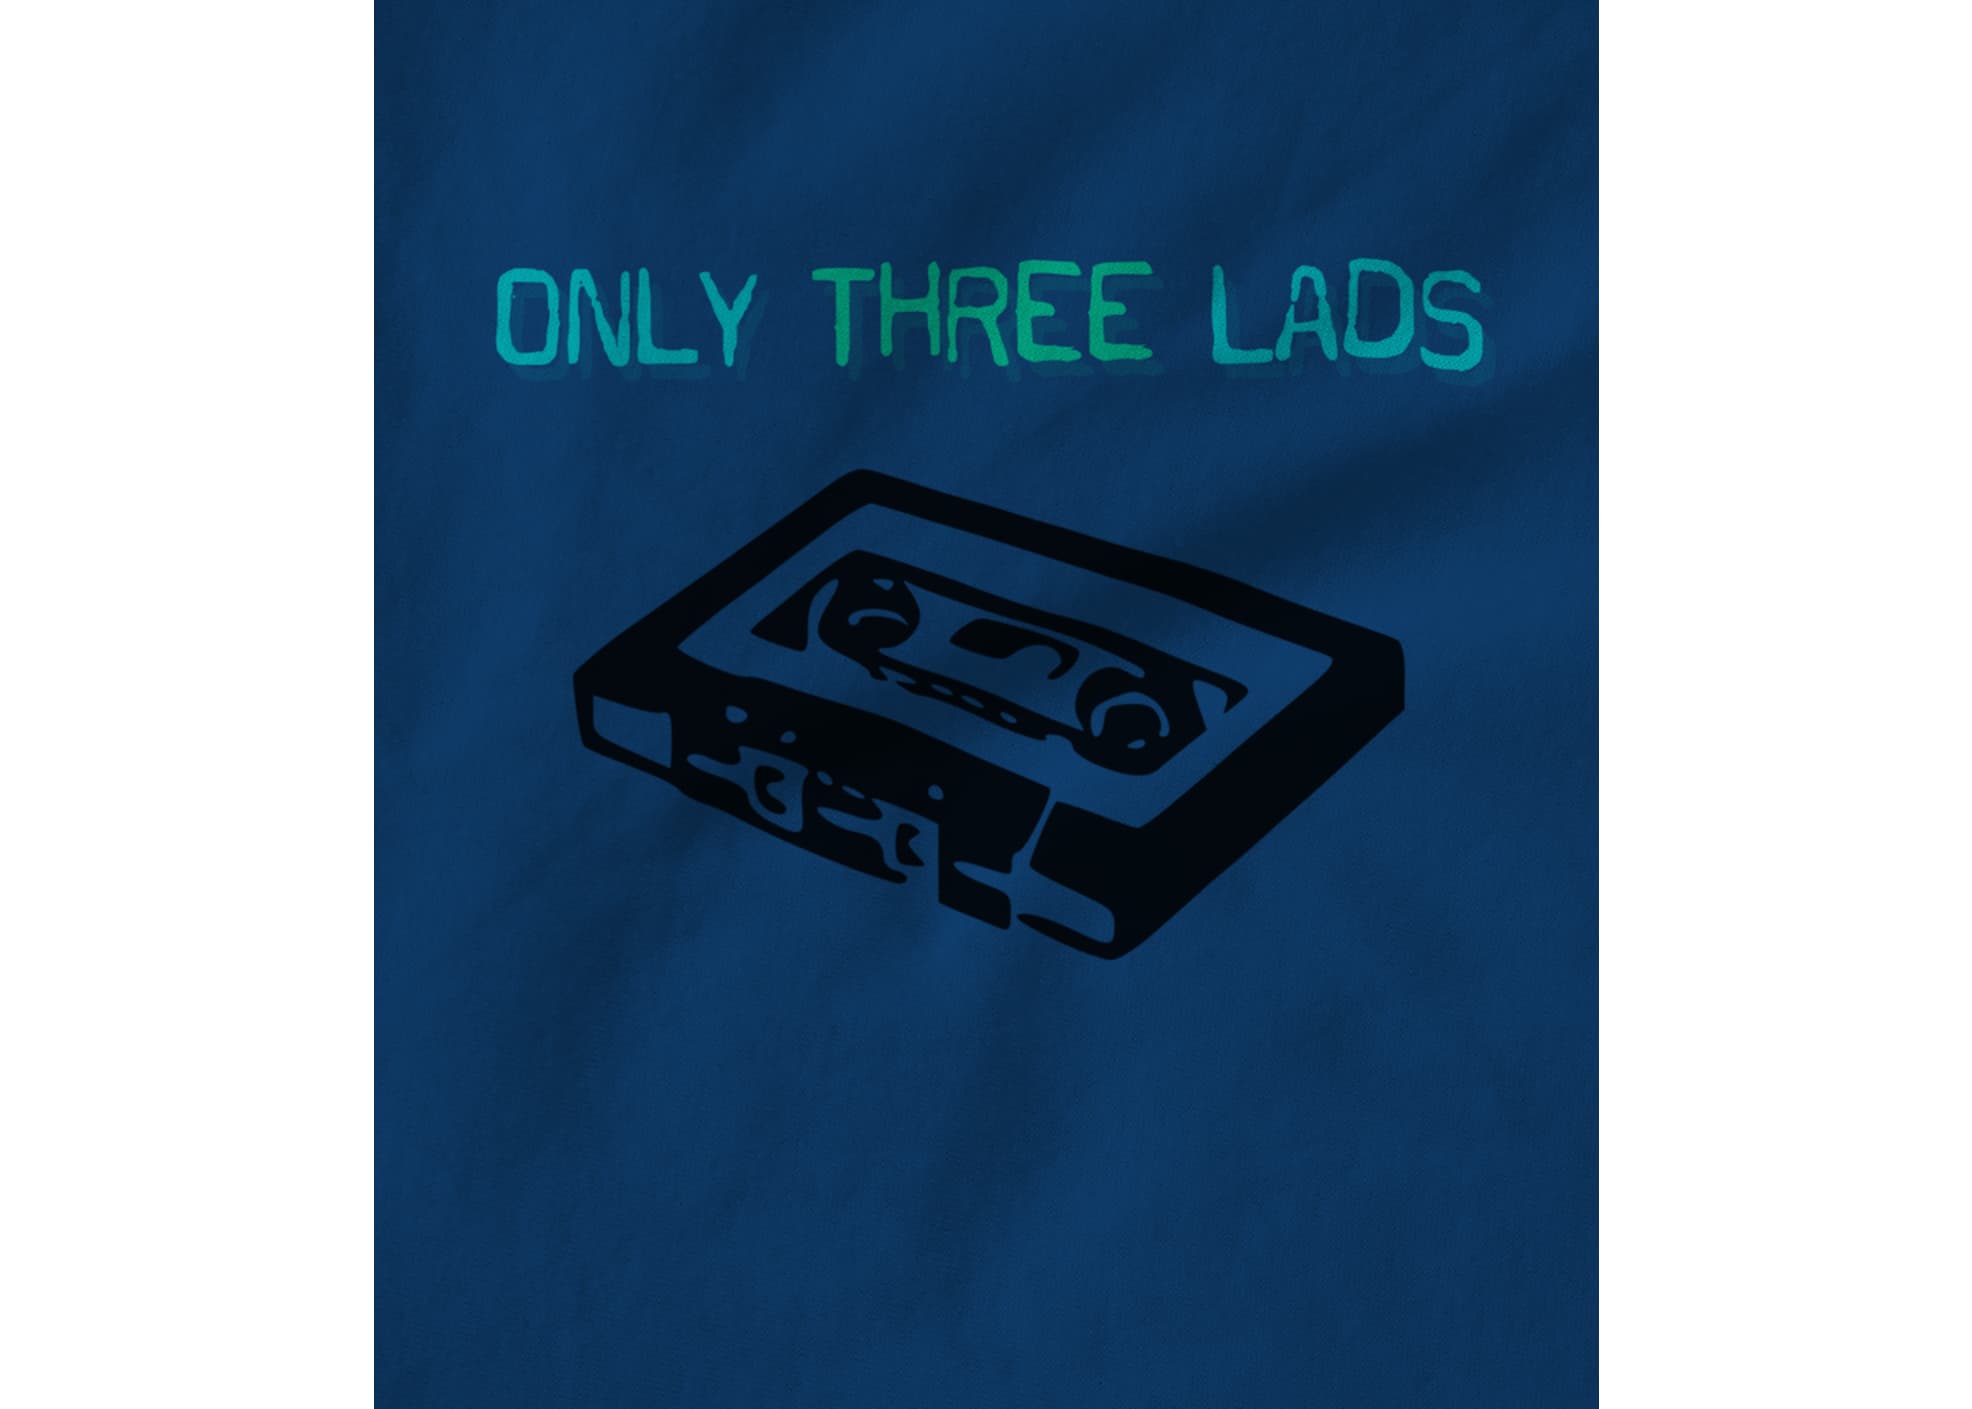 Only three lads o3l   tape  royal blue  1579510877